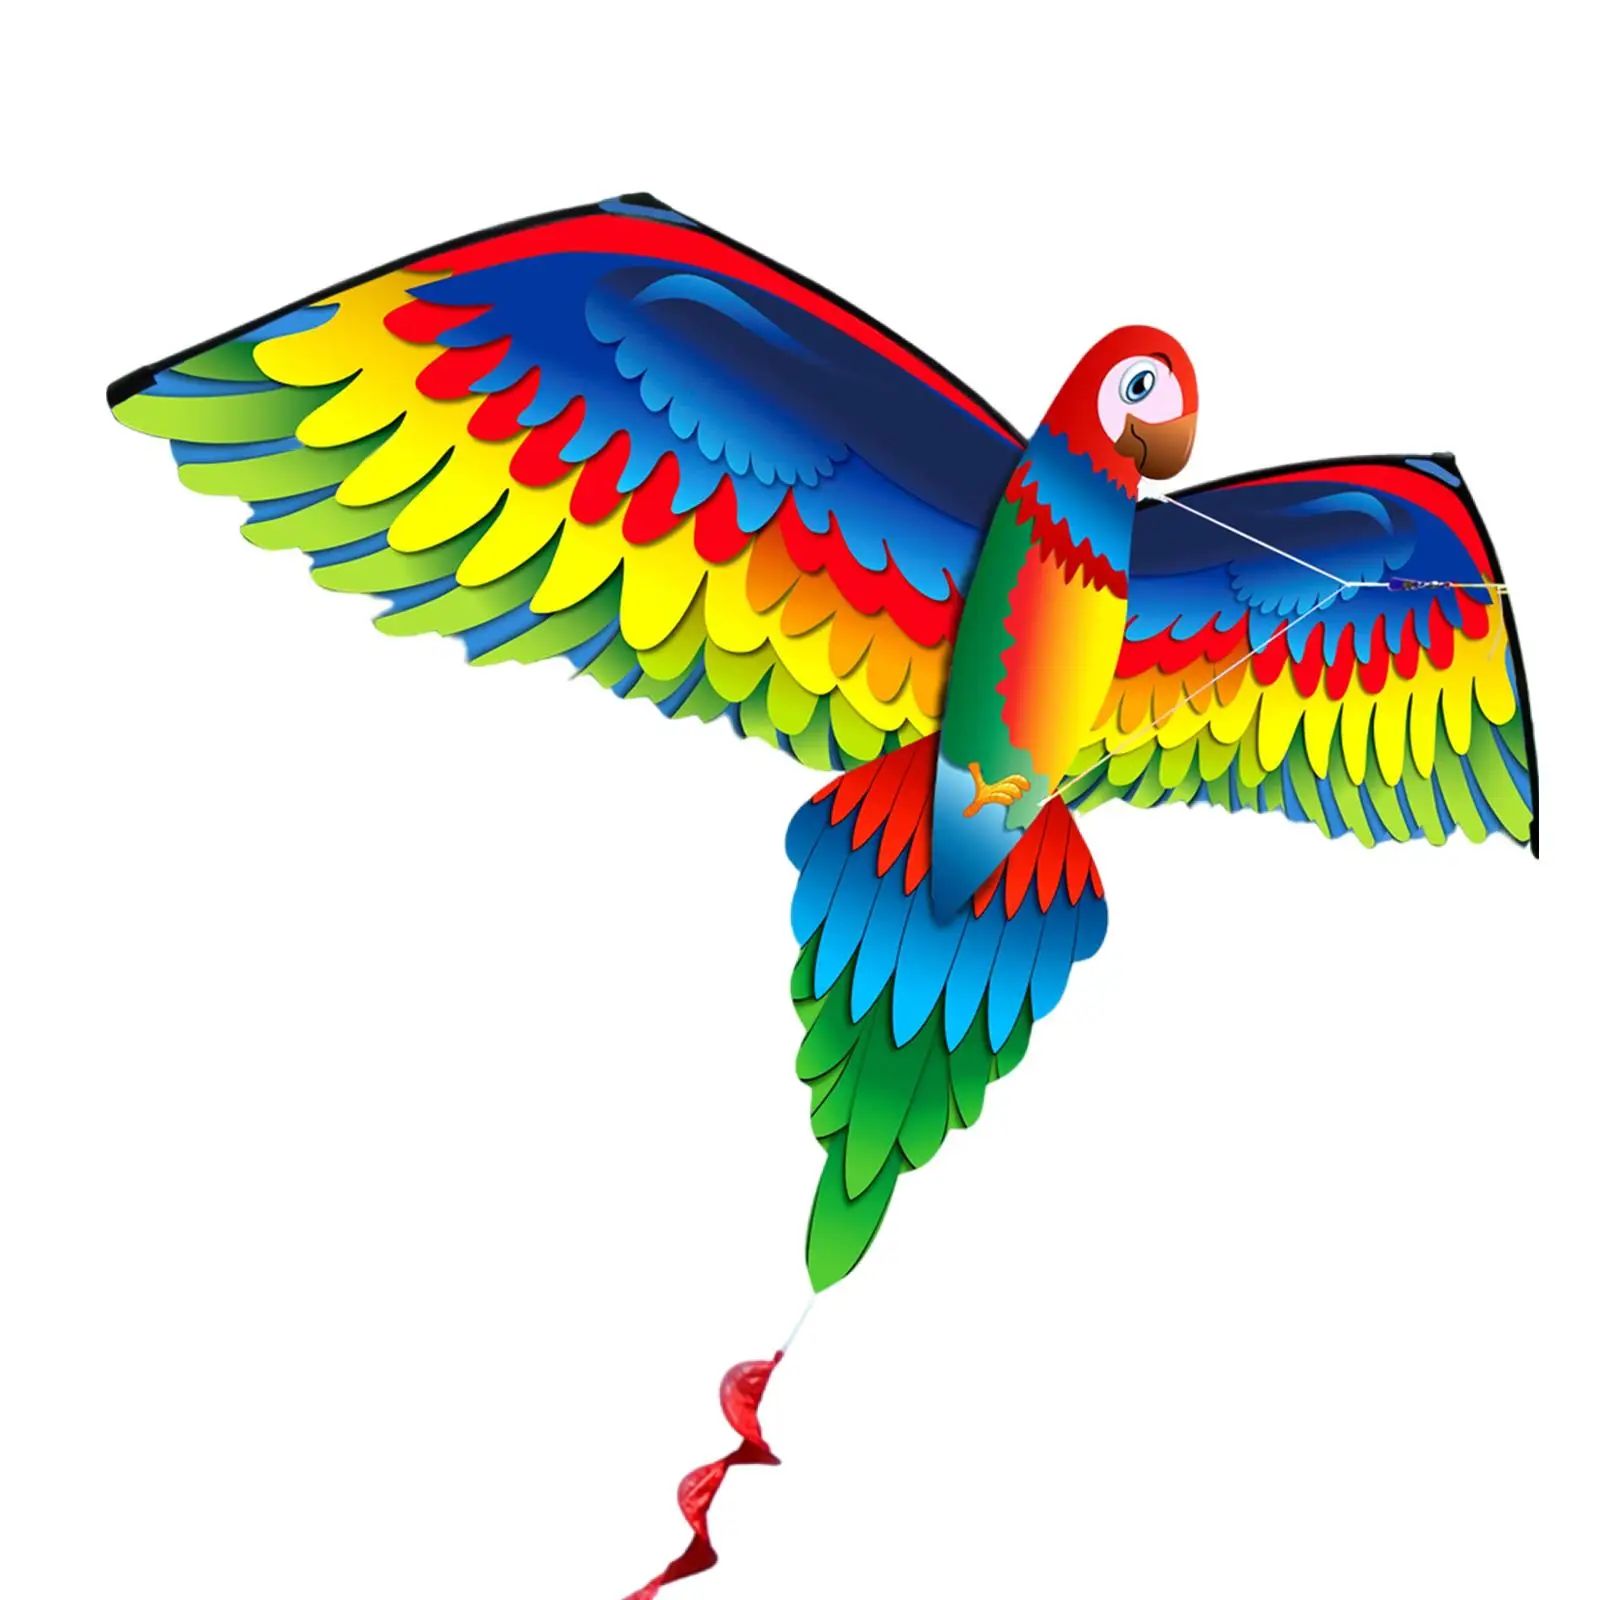 Realistic Parrot Kite Bat Kite Toy Beach Game Sport Playing Toy, Beach Kite Family Outdoor Games, for Outdoor Games Activities